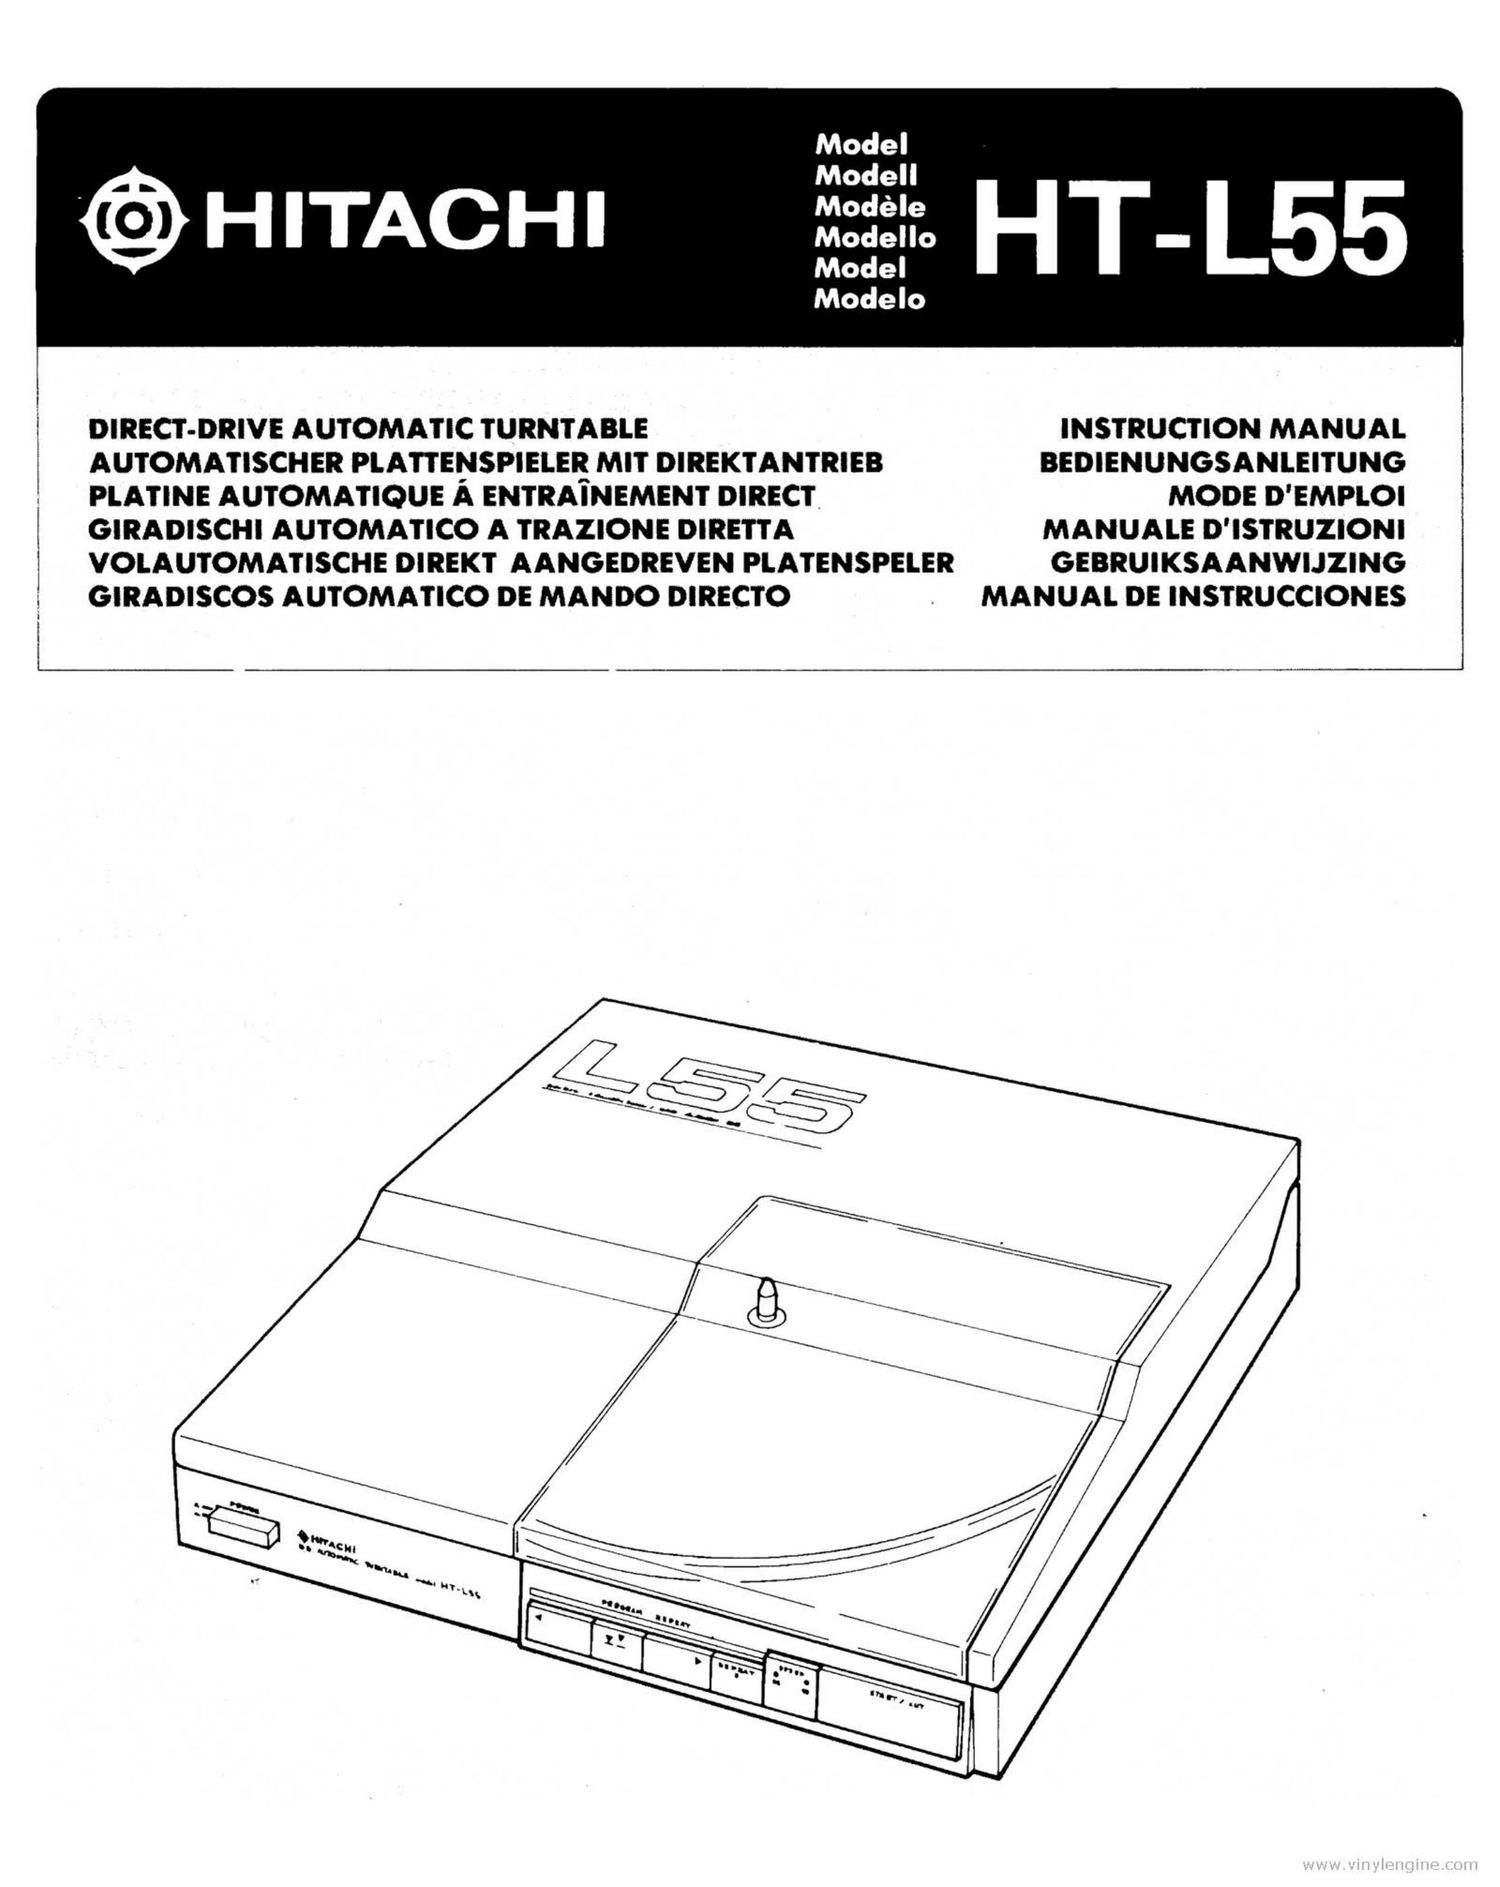 Hitachi HTL 55 Owners Manual